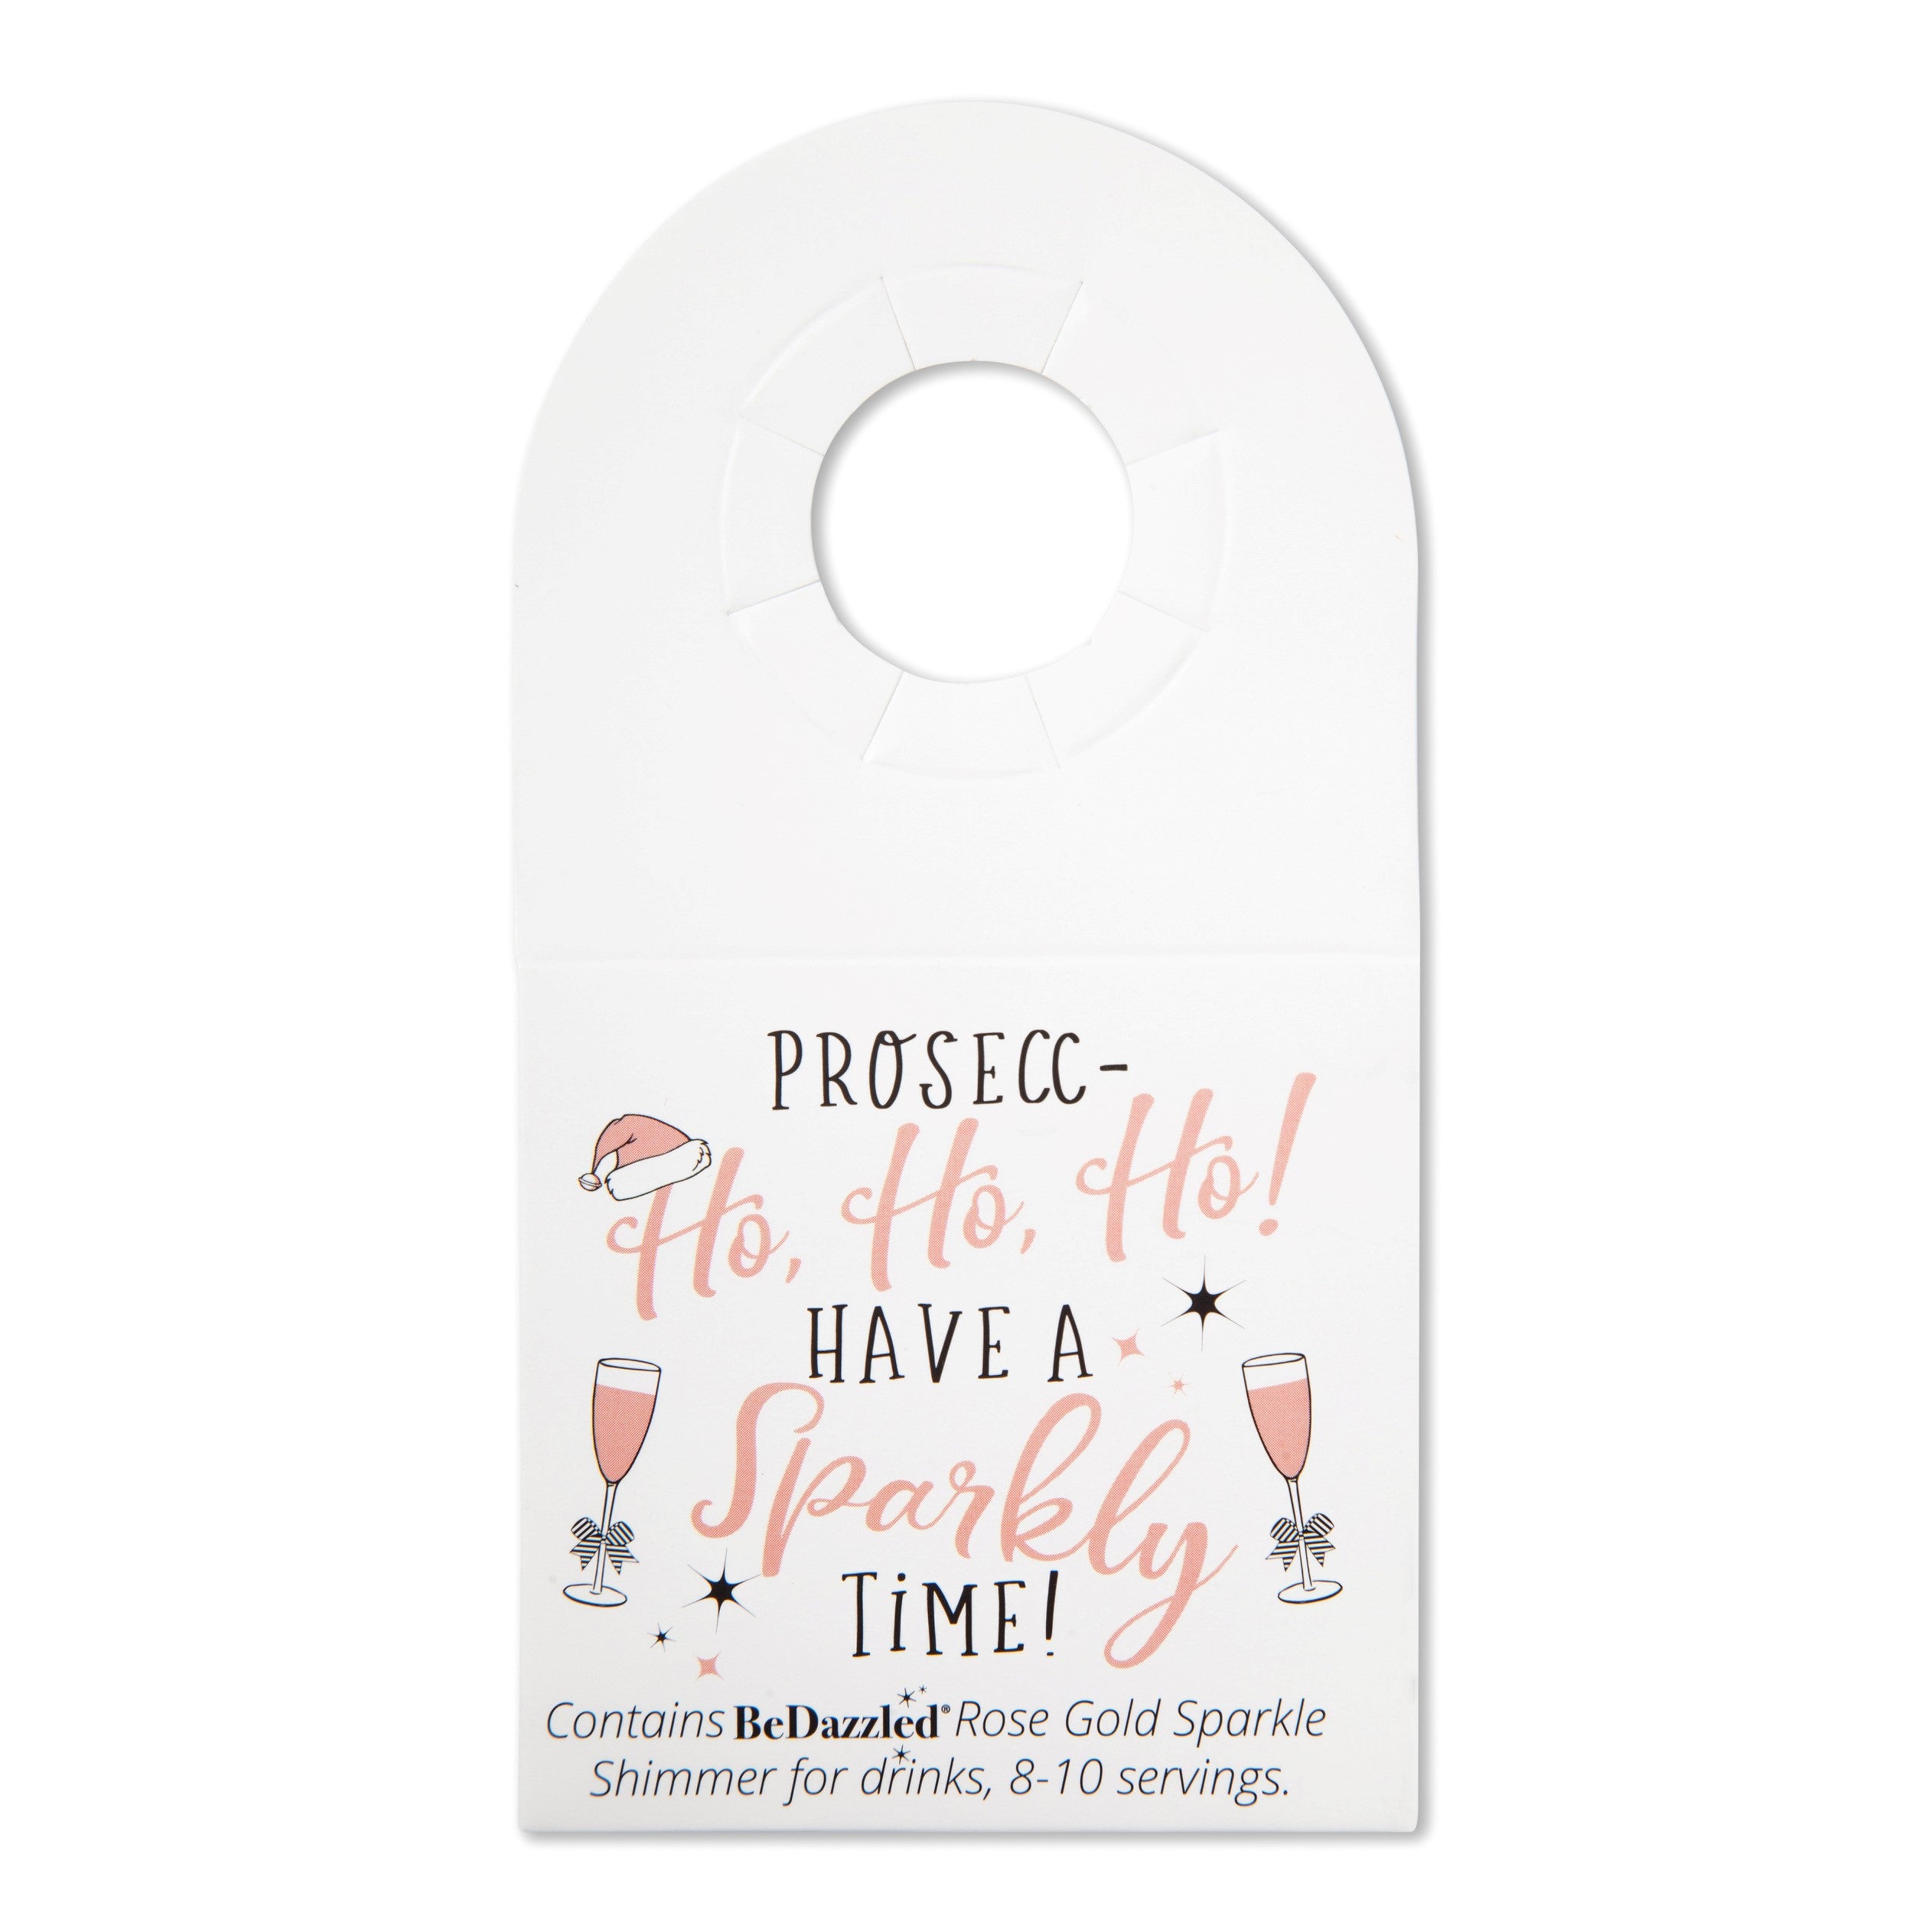 Prosecc Ho Ho Ho!  Have a Sparkly Time - bottle neck gift tag containing ROSE GOLD shimmer